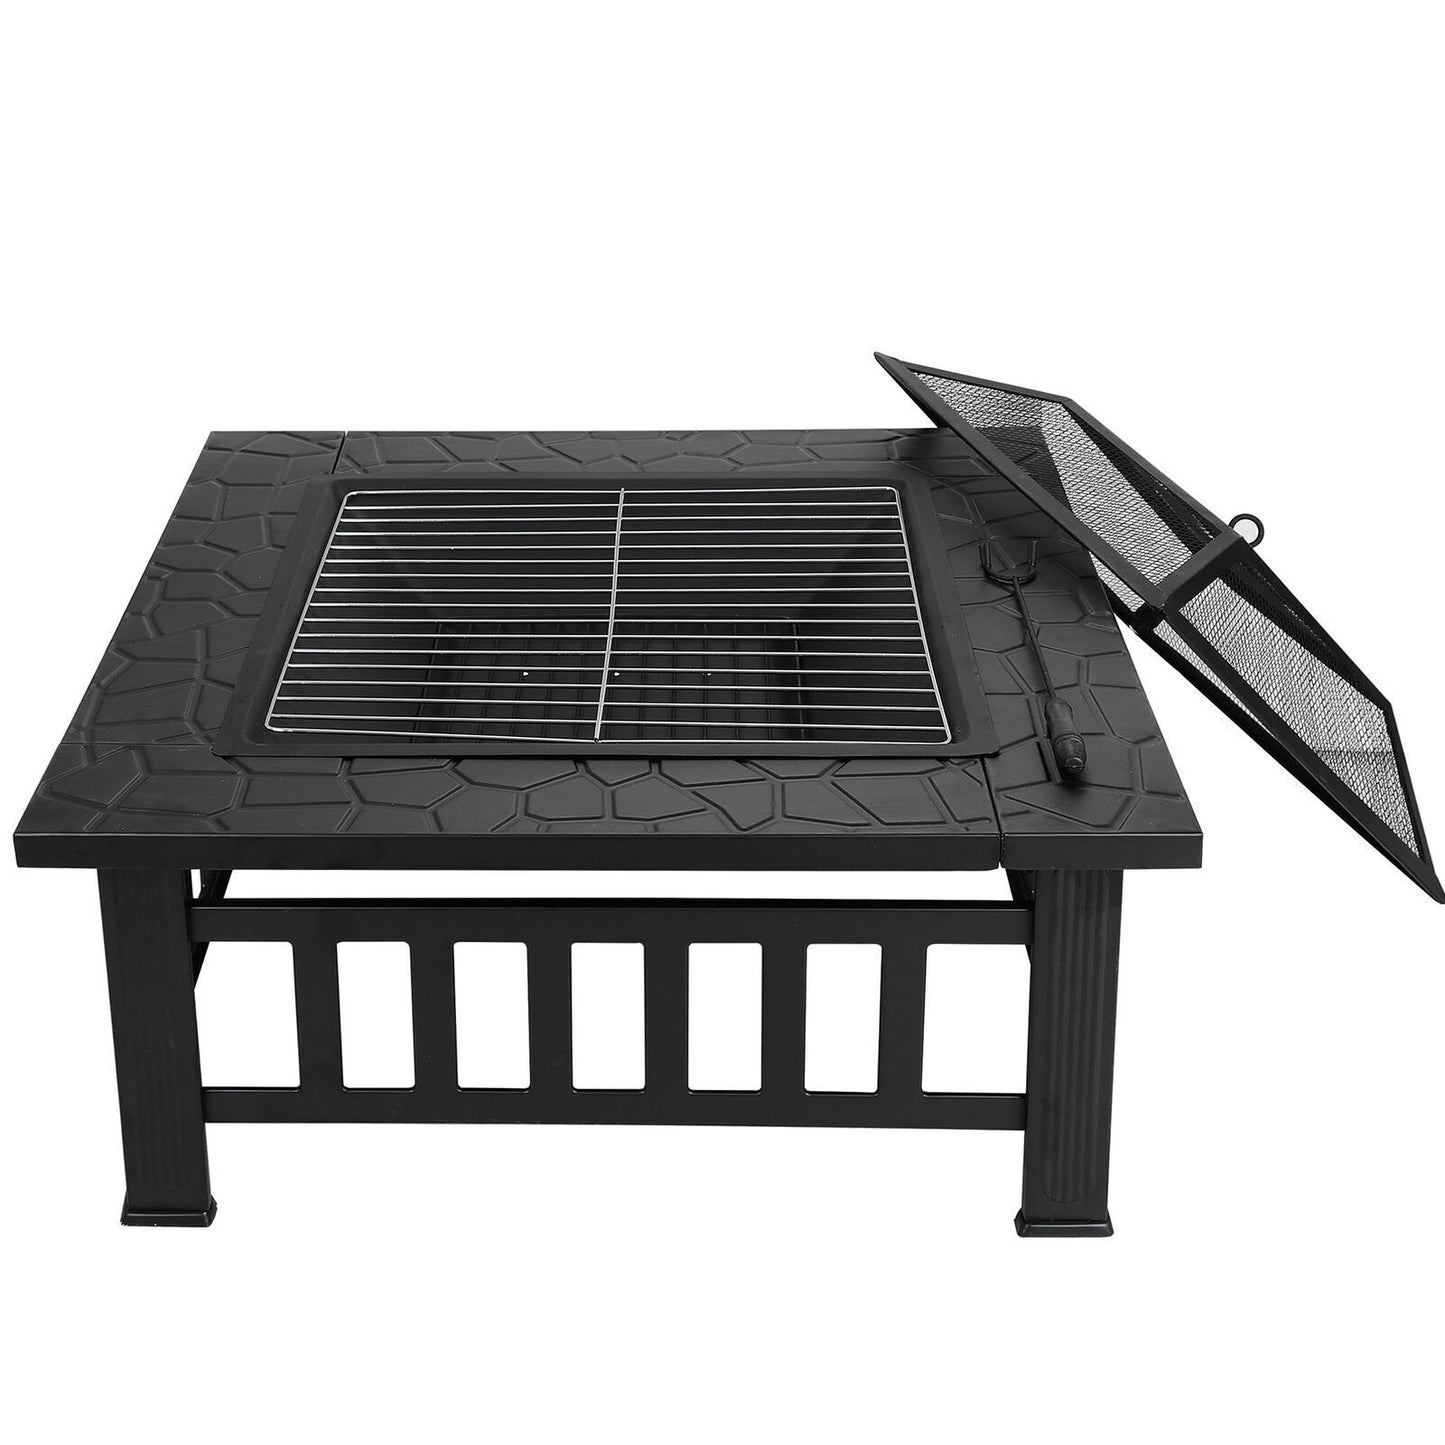 32" Wood Burning Fire Pit Outdoor Firepit Heater Backyard Patio Stove Fireplace